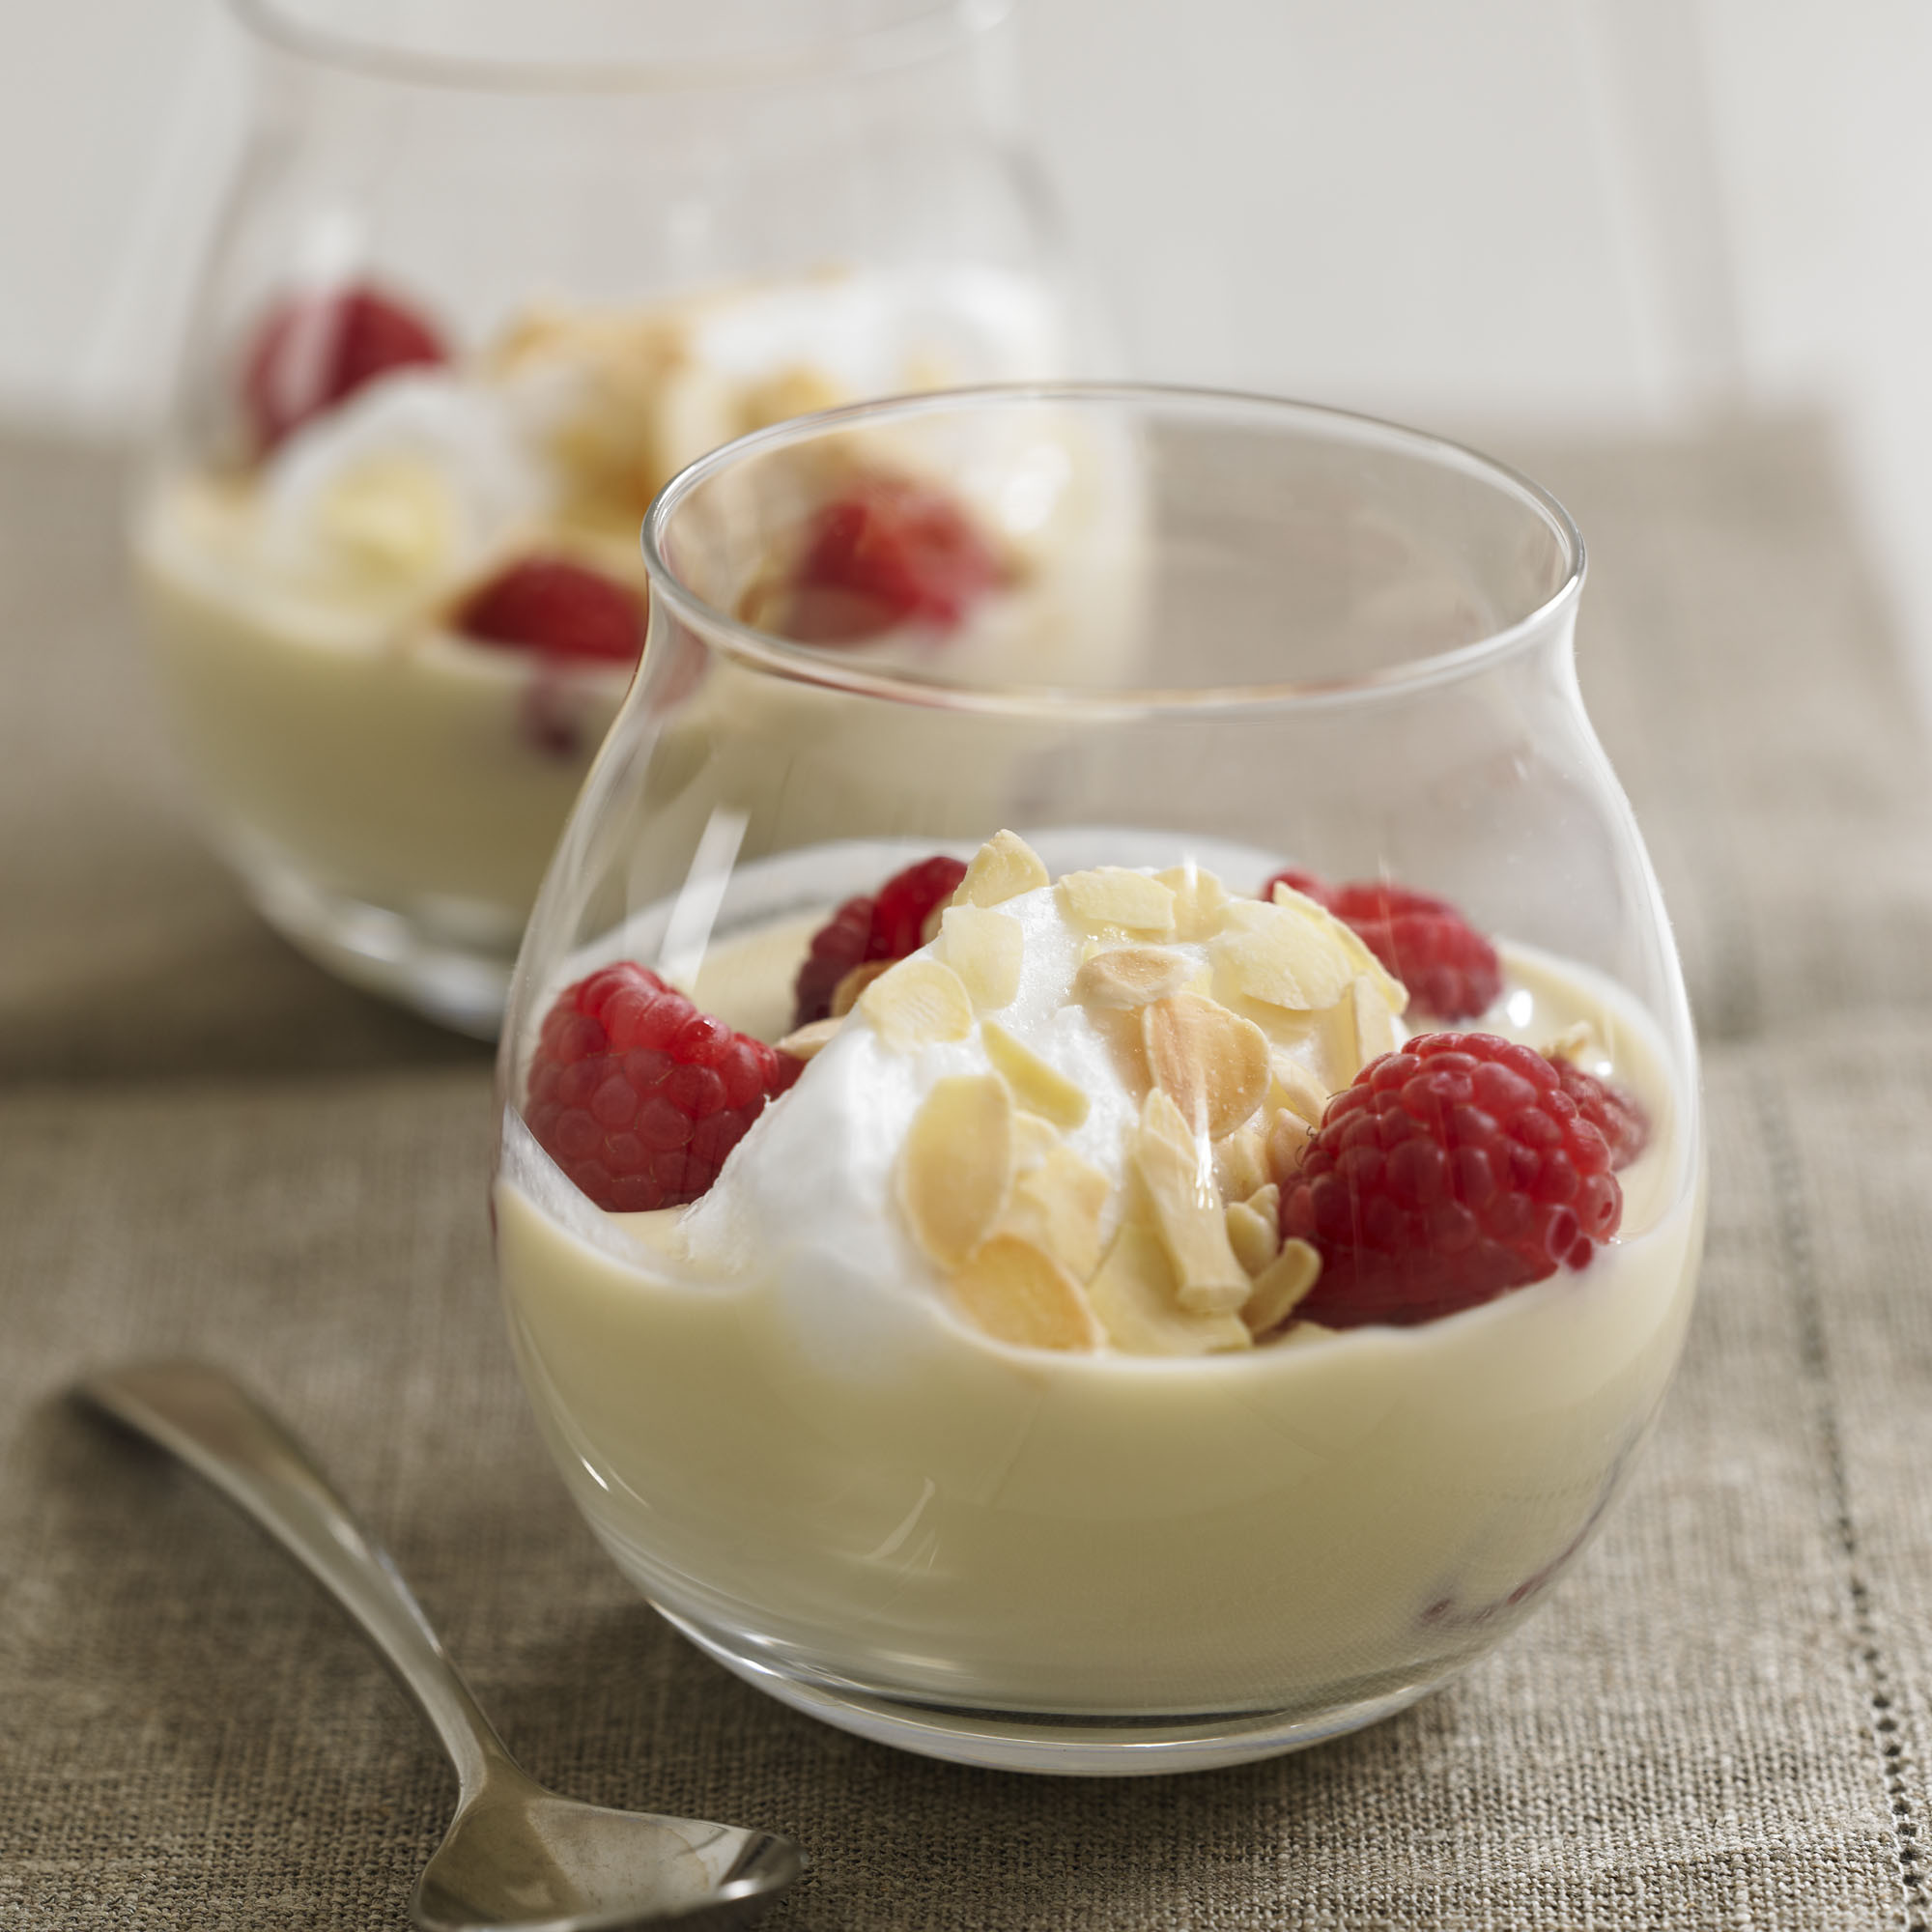 Floating Island (Dessert)
 Rosewater Floating Islands with Framboise Custard and